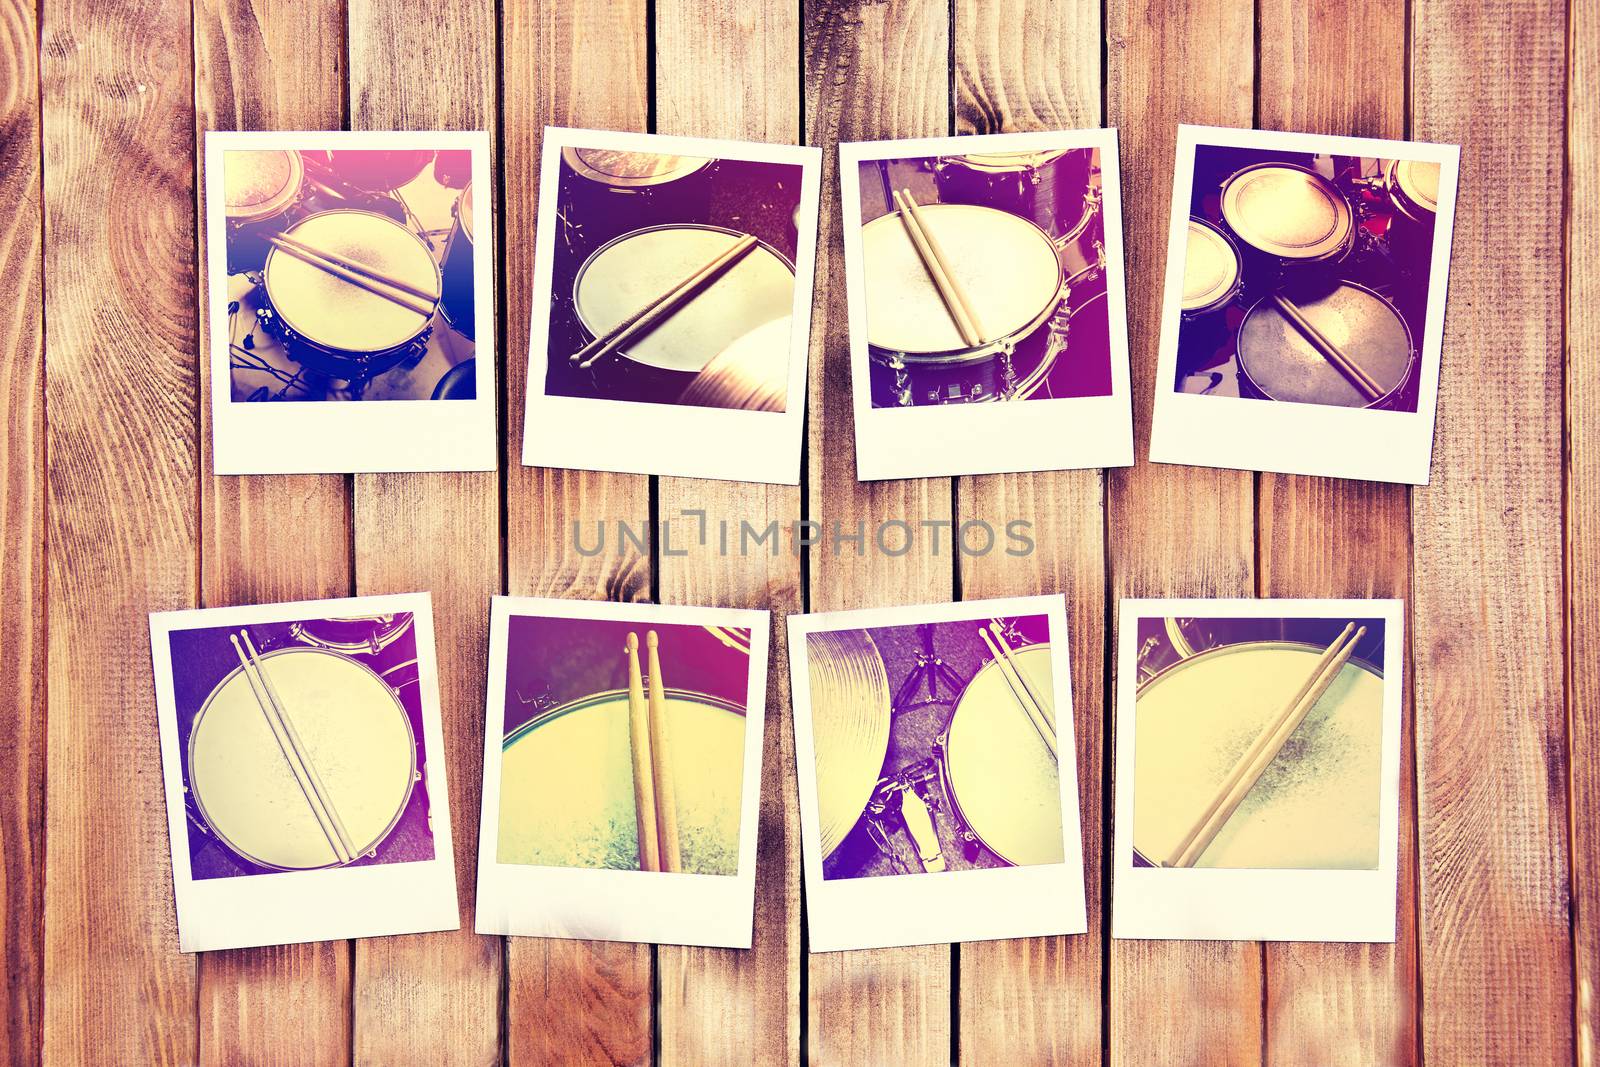 Drums conceptual image. Drums and drumsticks on the photo frames. Retro vintage instagram picture.